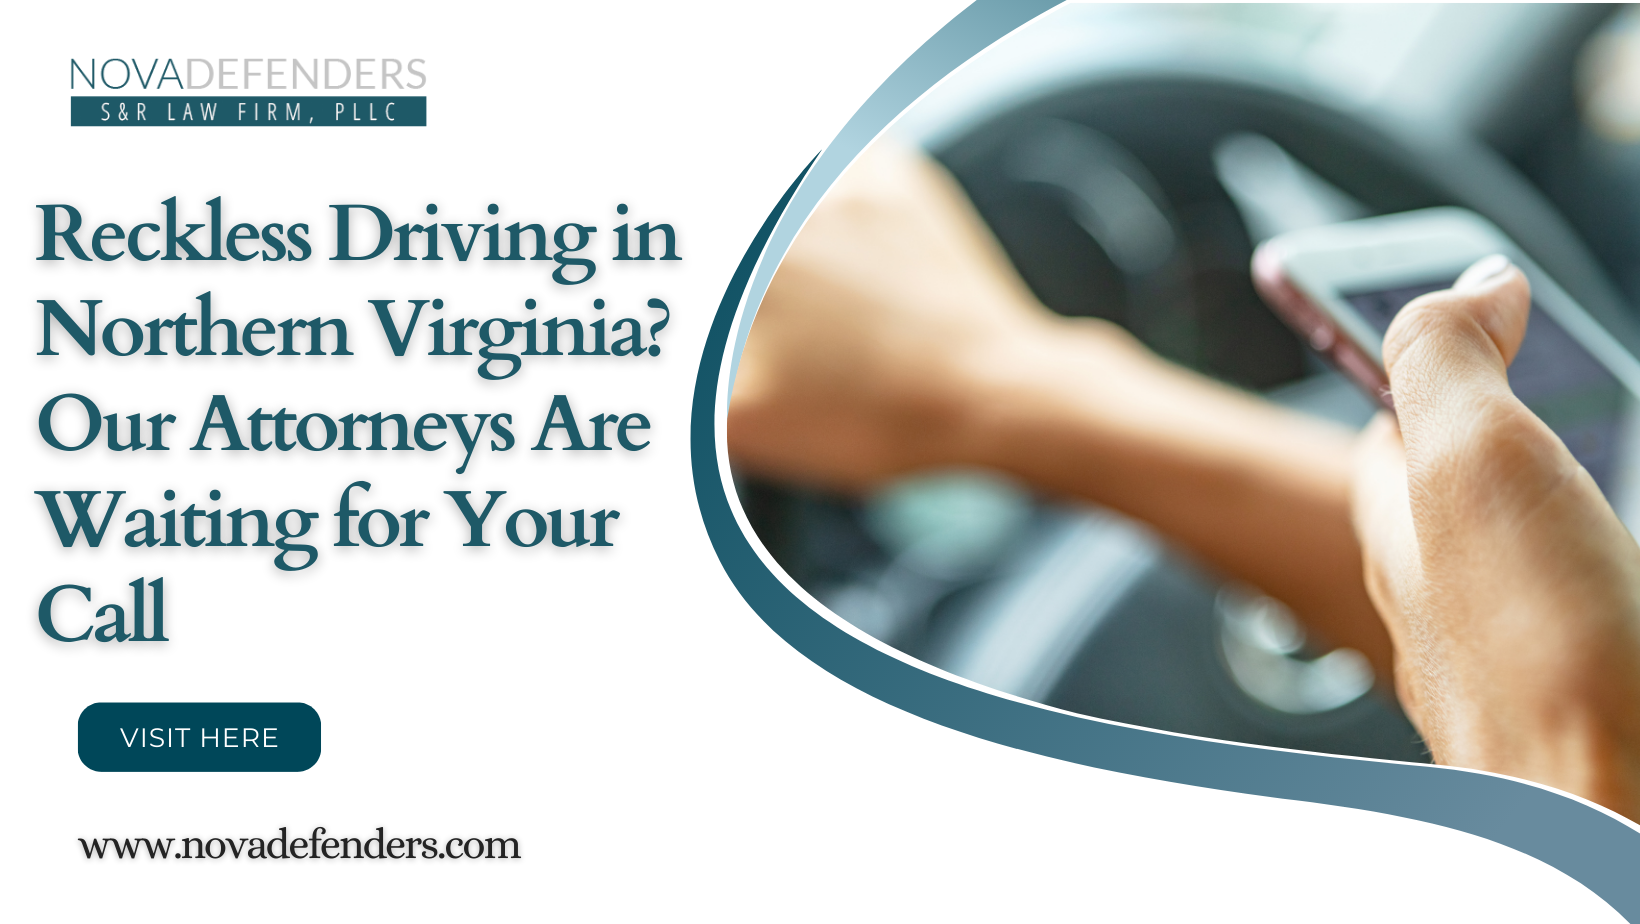 Reckless Driving in Northern Virginia? Our Attorneys Are Waiting for Your Call